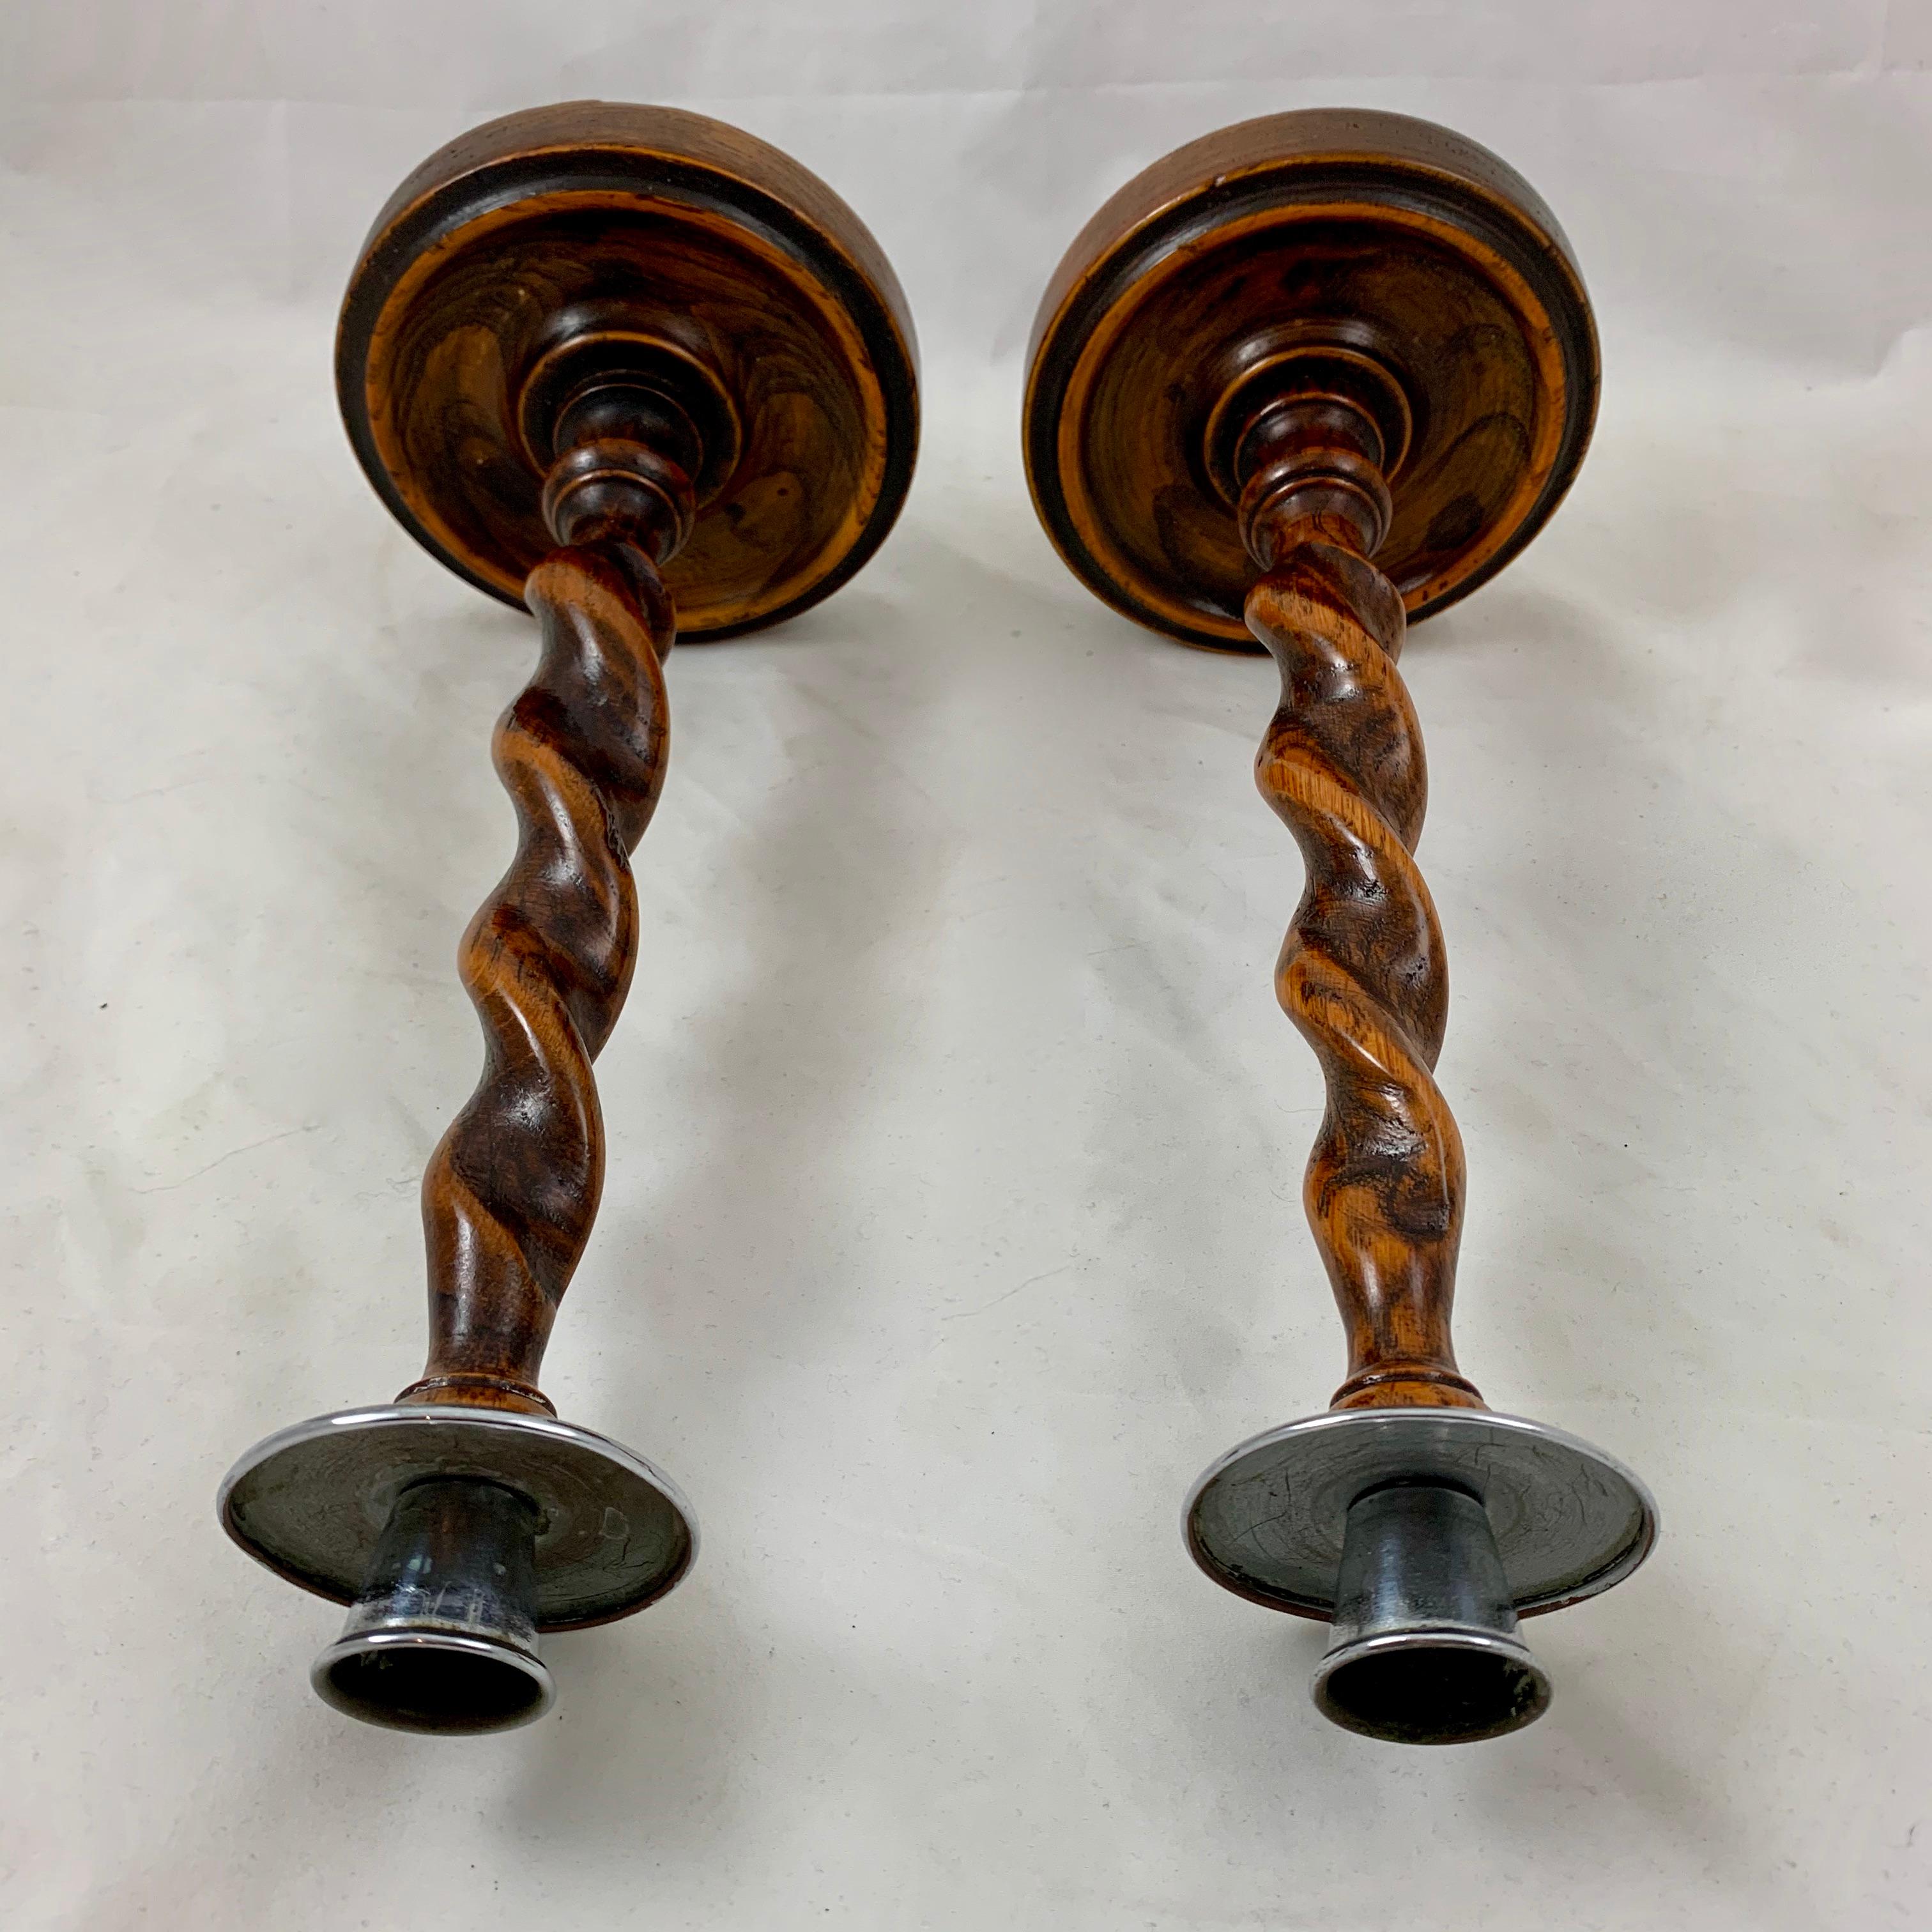 Hand-Carved 19th Century English Barley-Twist Oak and Pewter Topped Candlesticks, a Pair